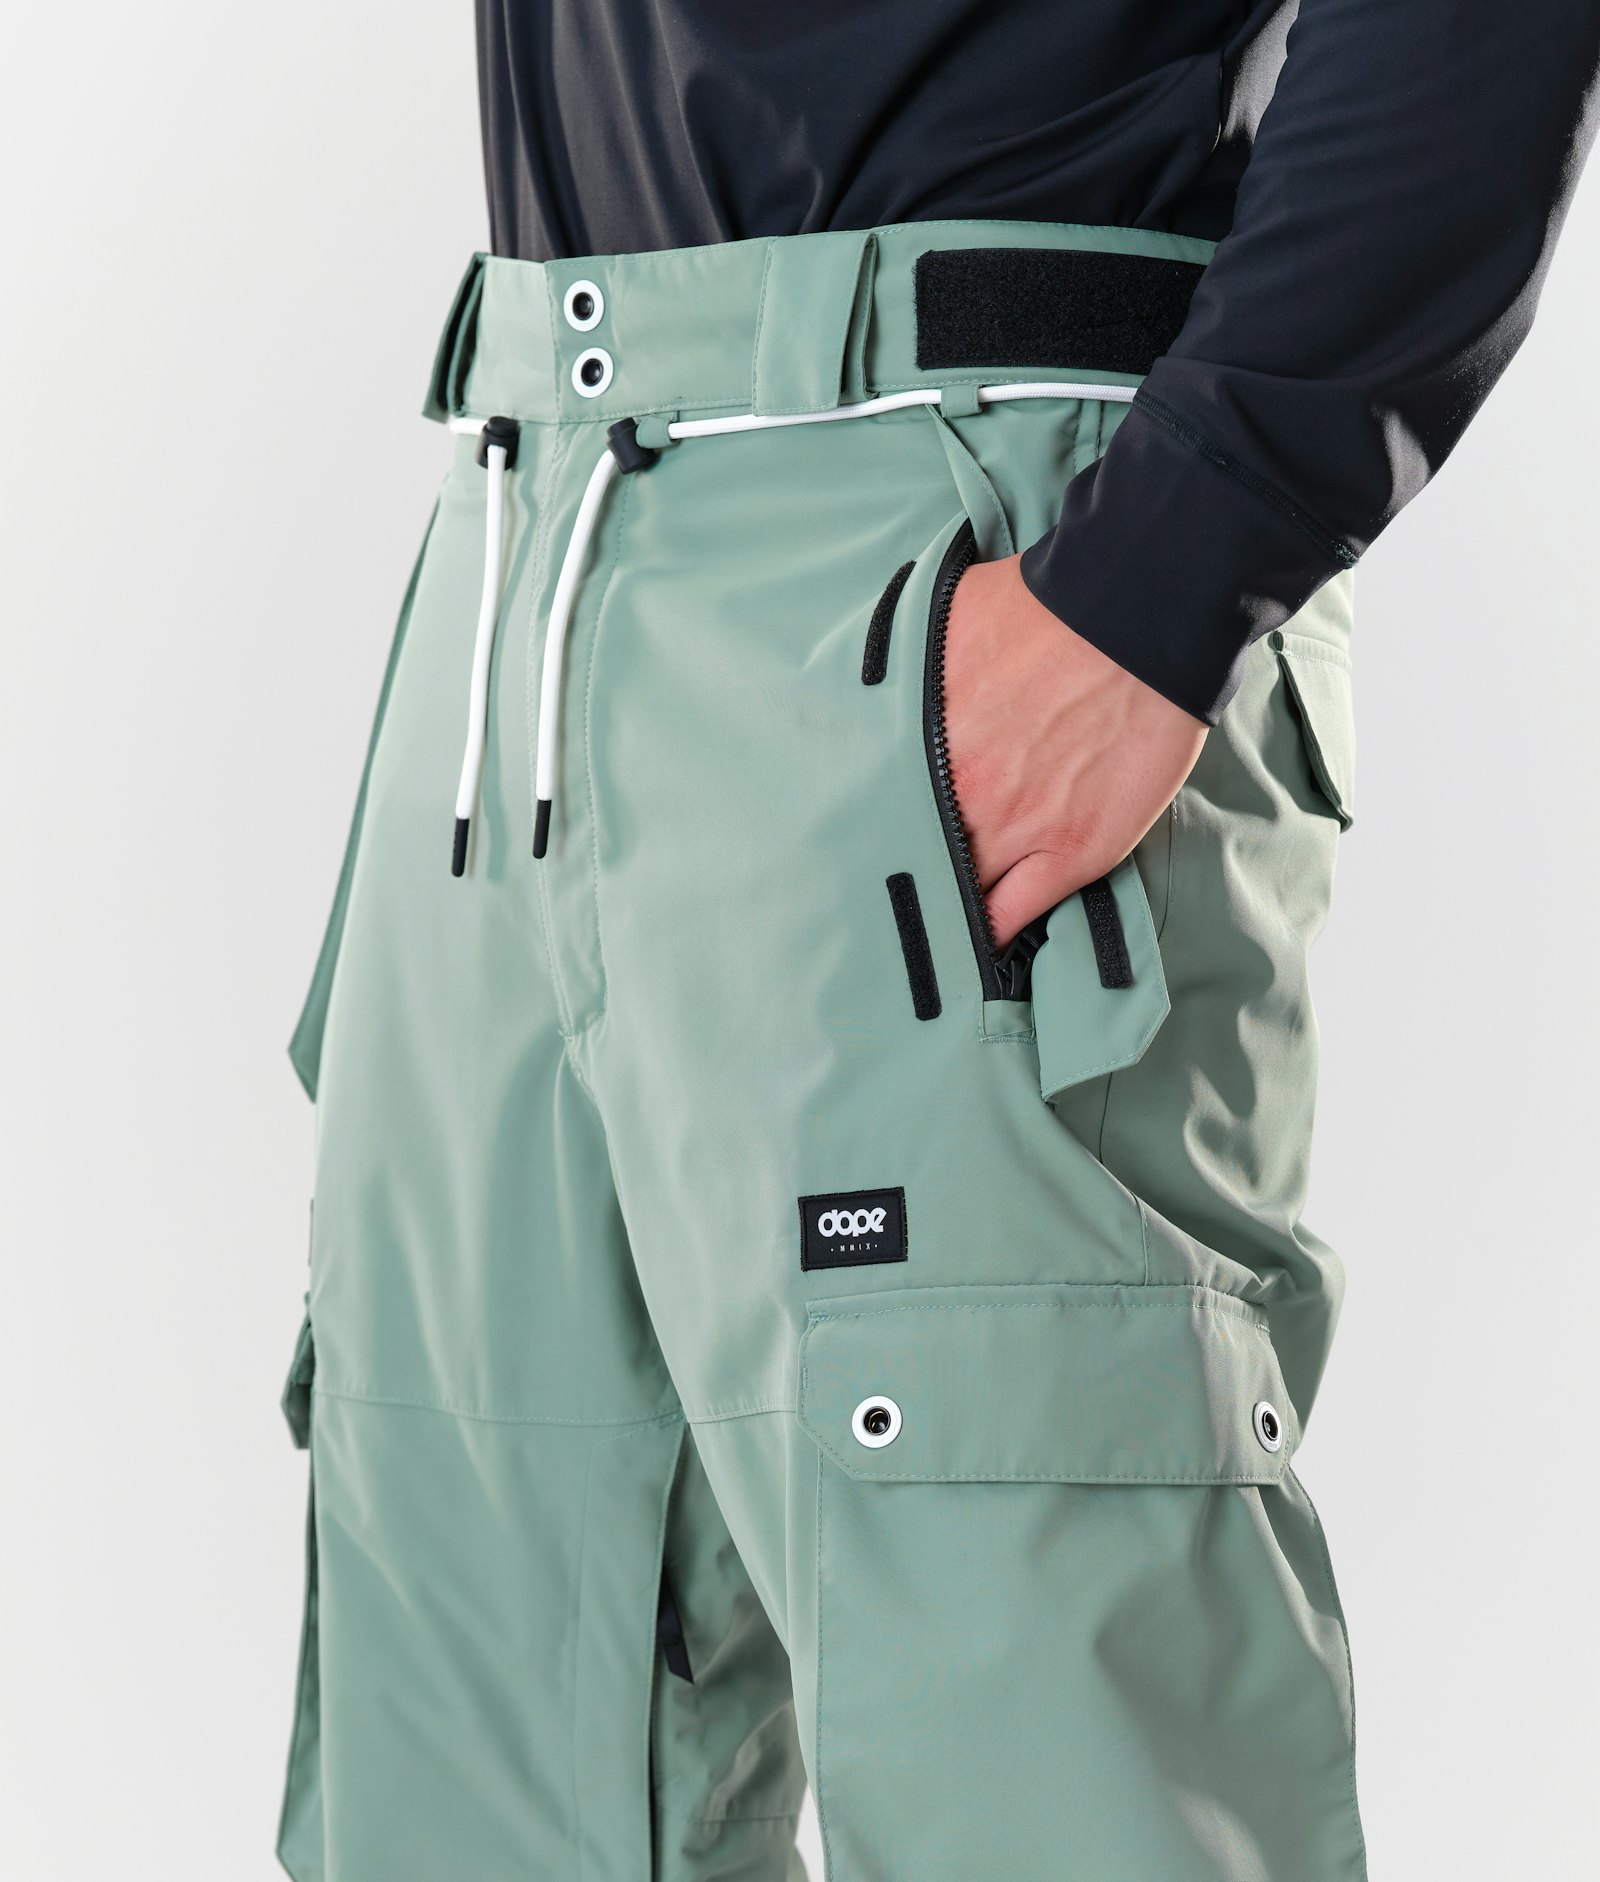 Dope Iconic 2020 Pantalones Esquí Hombre Faded Green